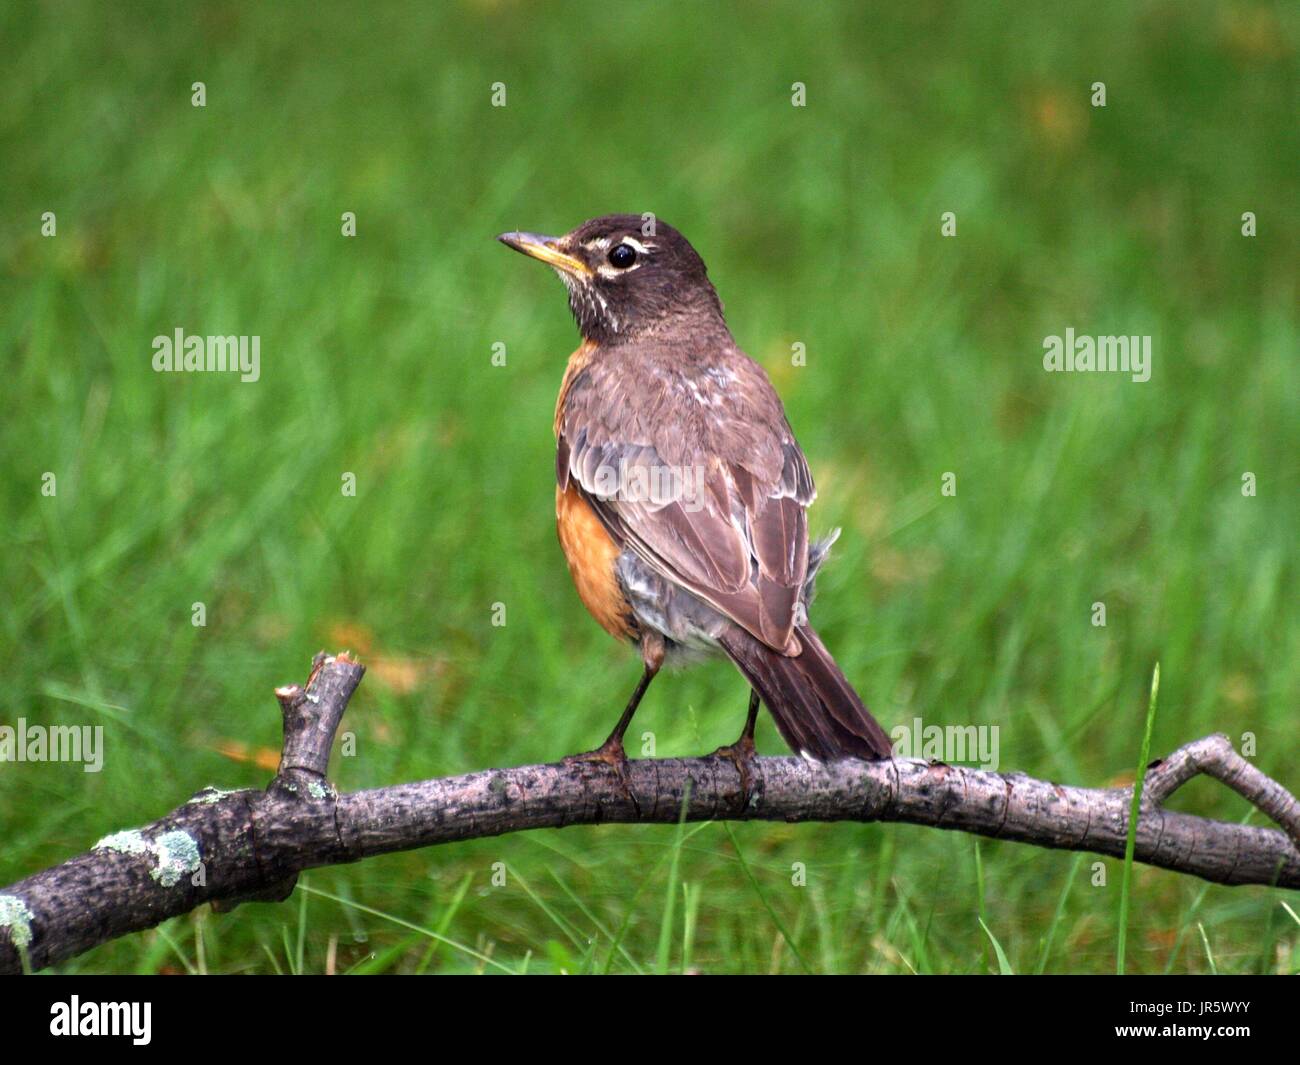 Robin standing on arched branch on ground in the grass Stock Photo